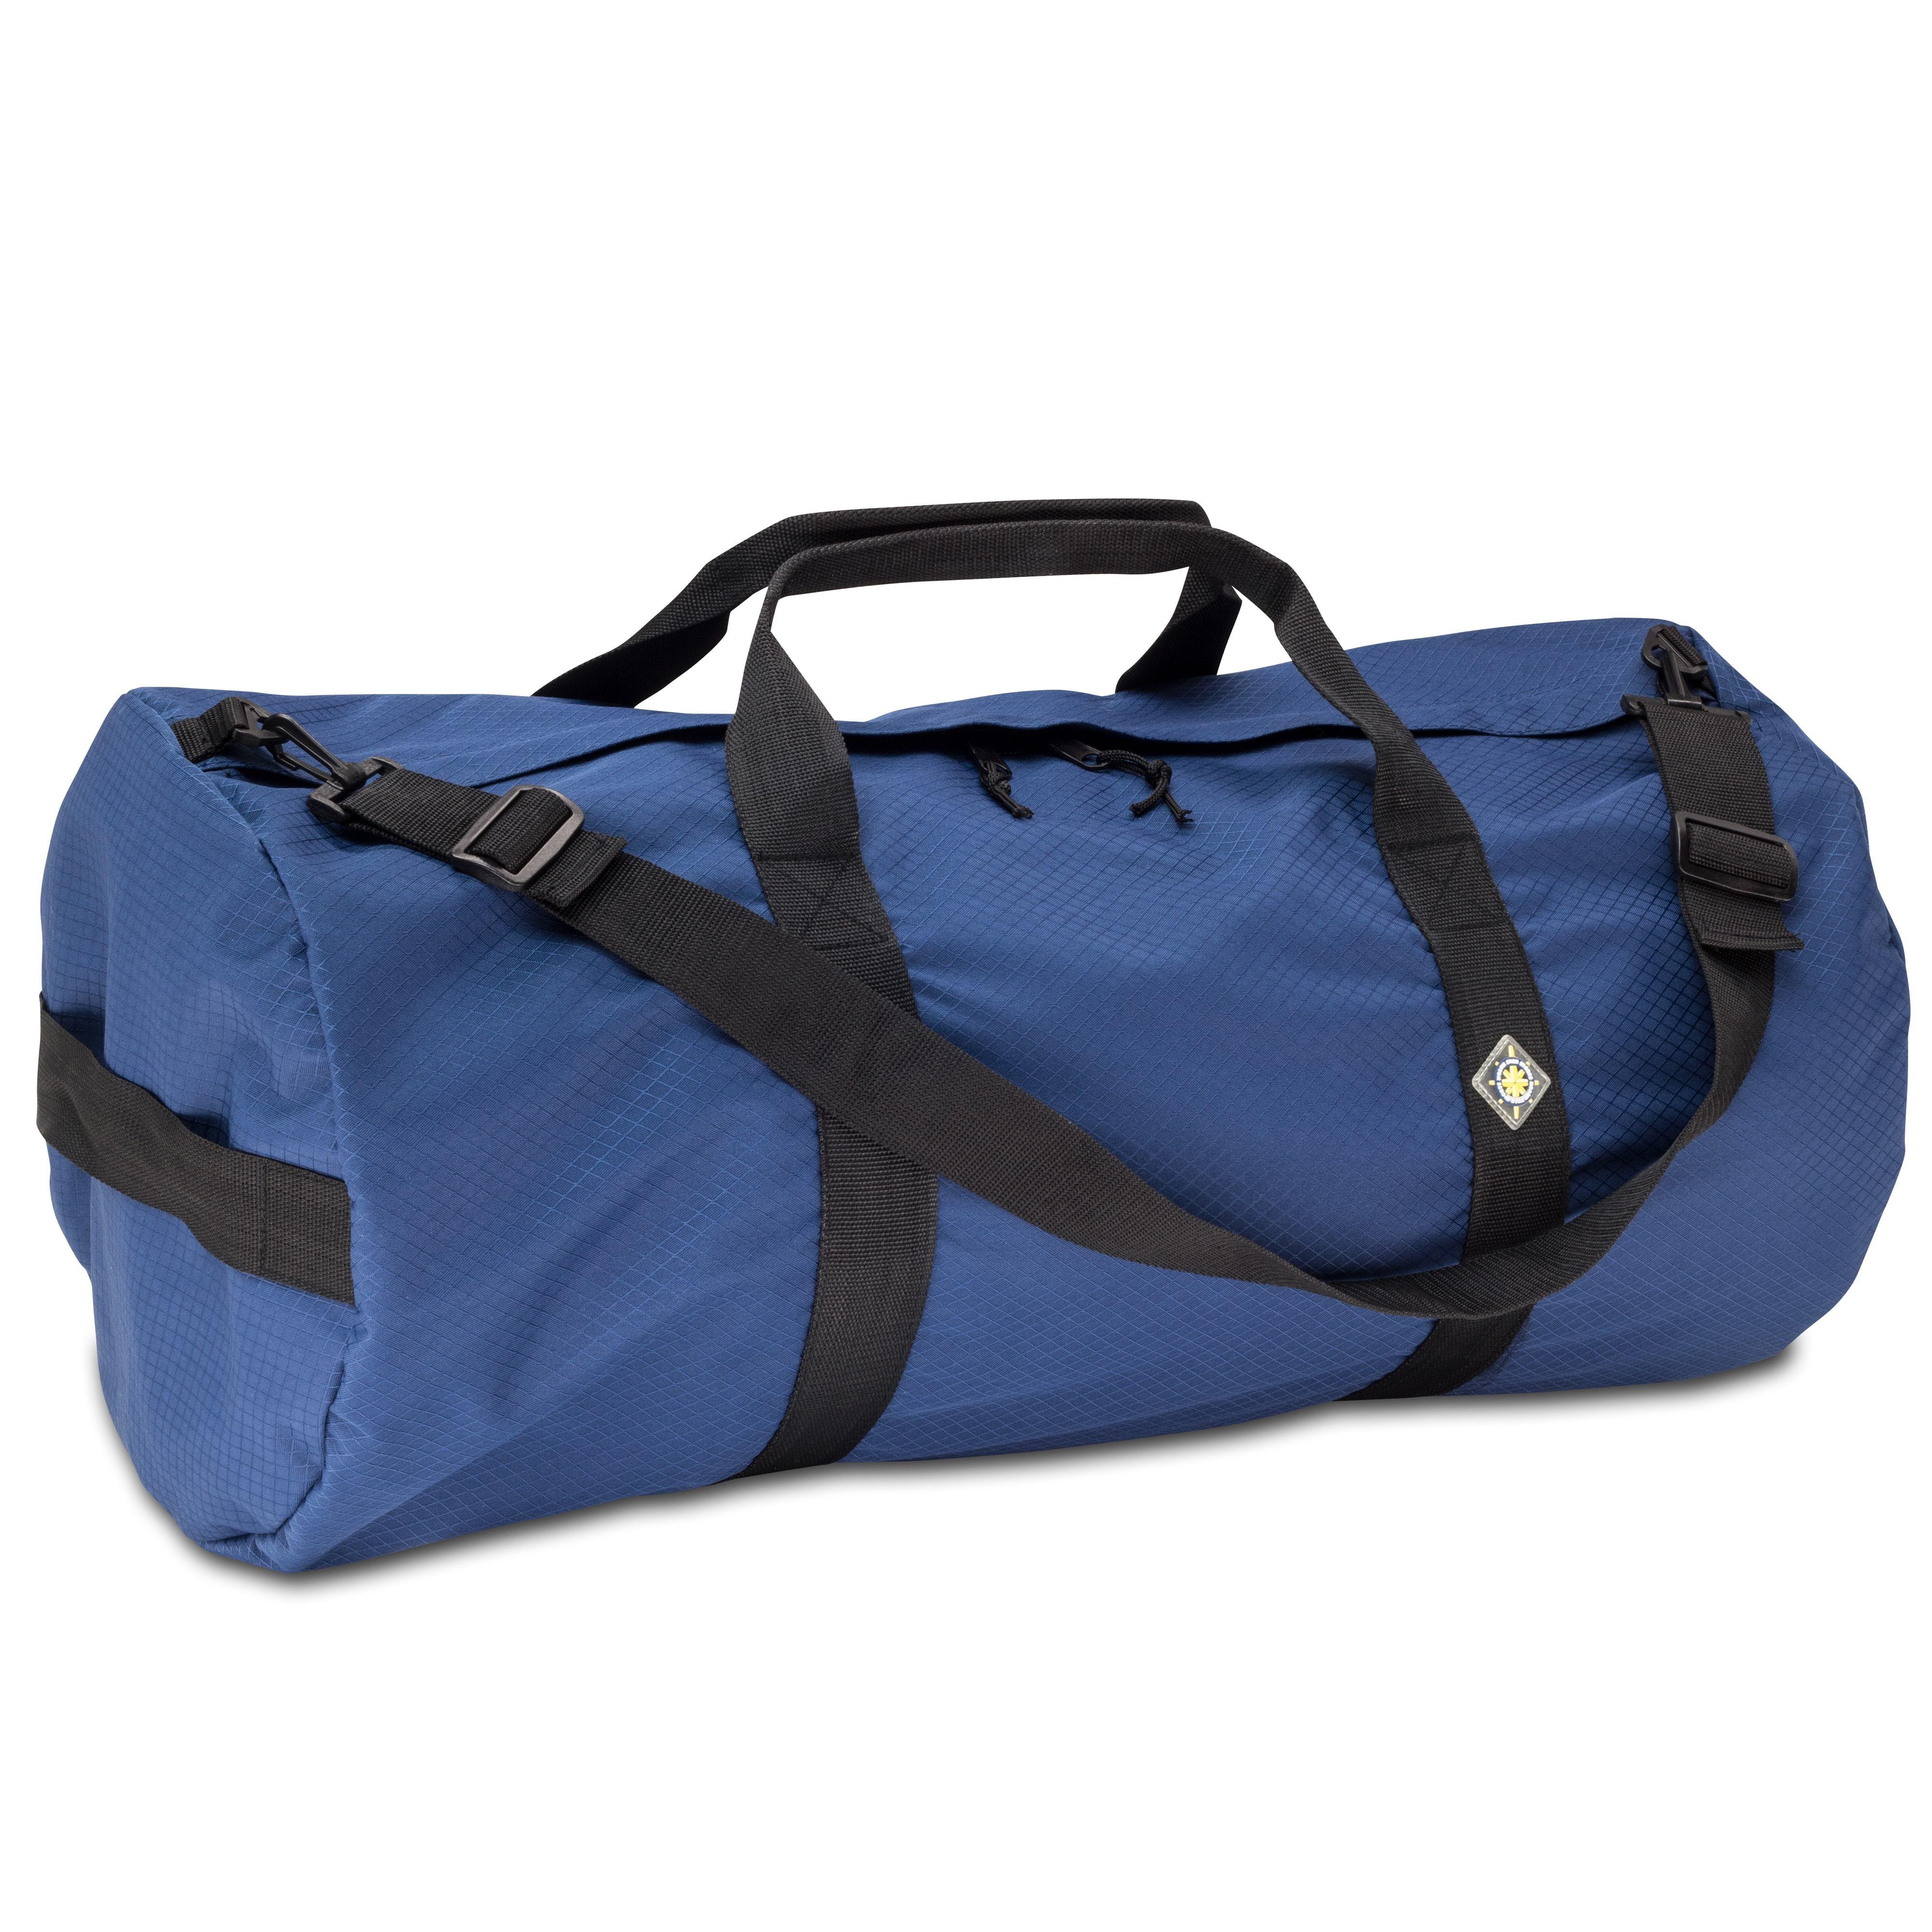 Studio photo the Pacfic Blue SD1430DLX Standard Duffle by Northstar Bags. 75 liter duffel with diamond ripstop fabric, thick webbing straps, and a large format metal zipper. Guaranteed for life.